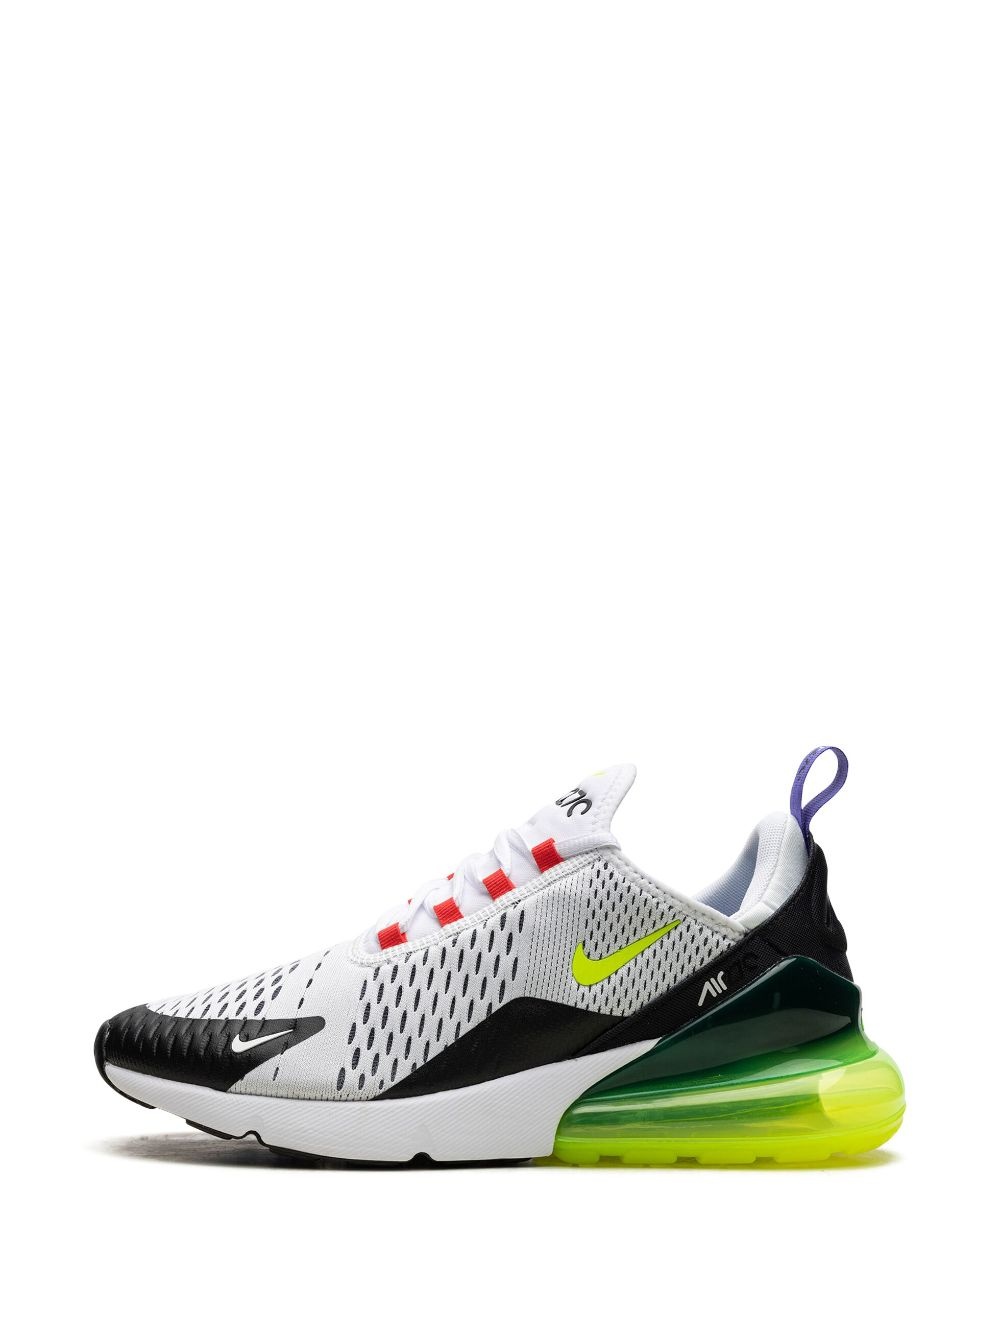 Air Max 270 "White/Volt/Siren Red" sneakers - 6